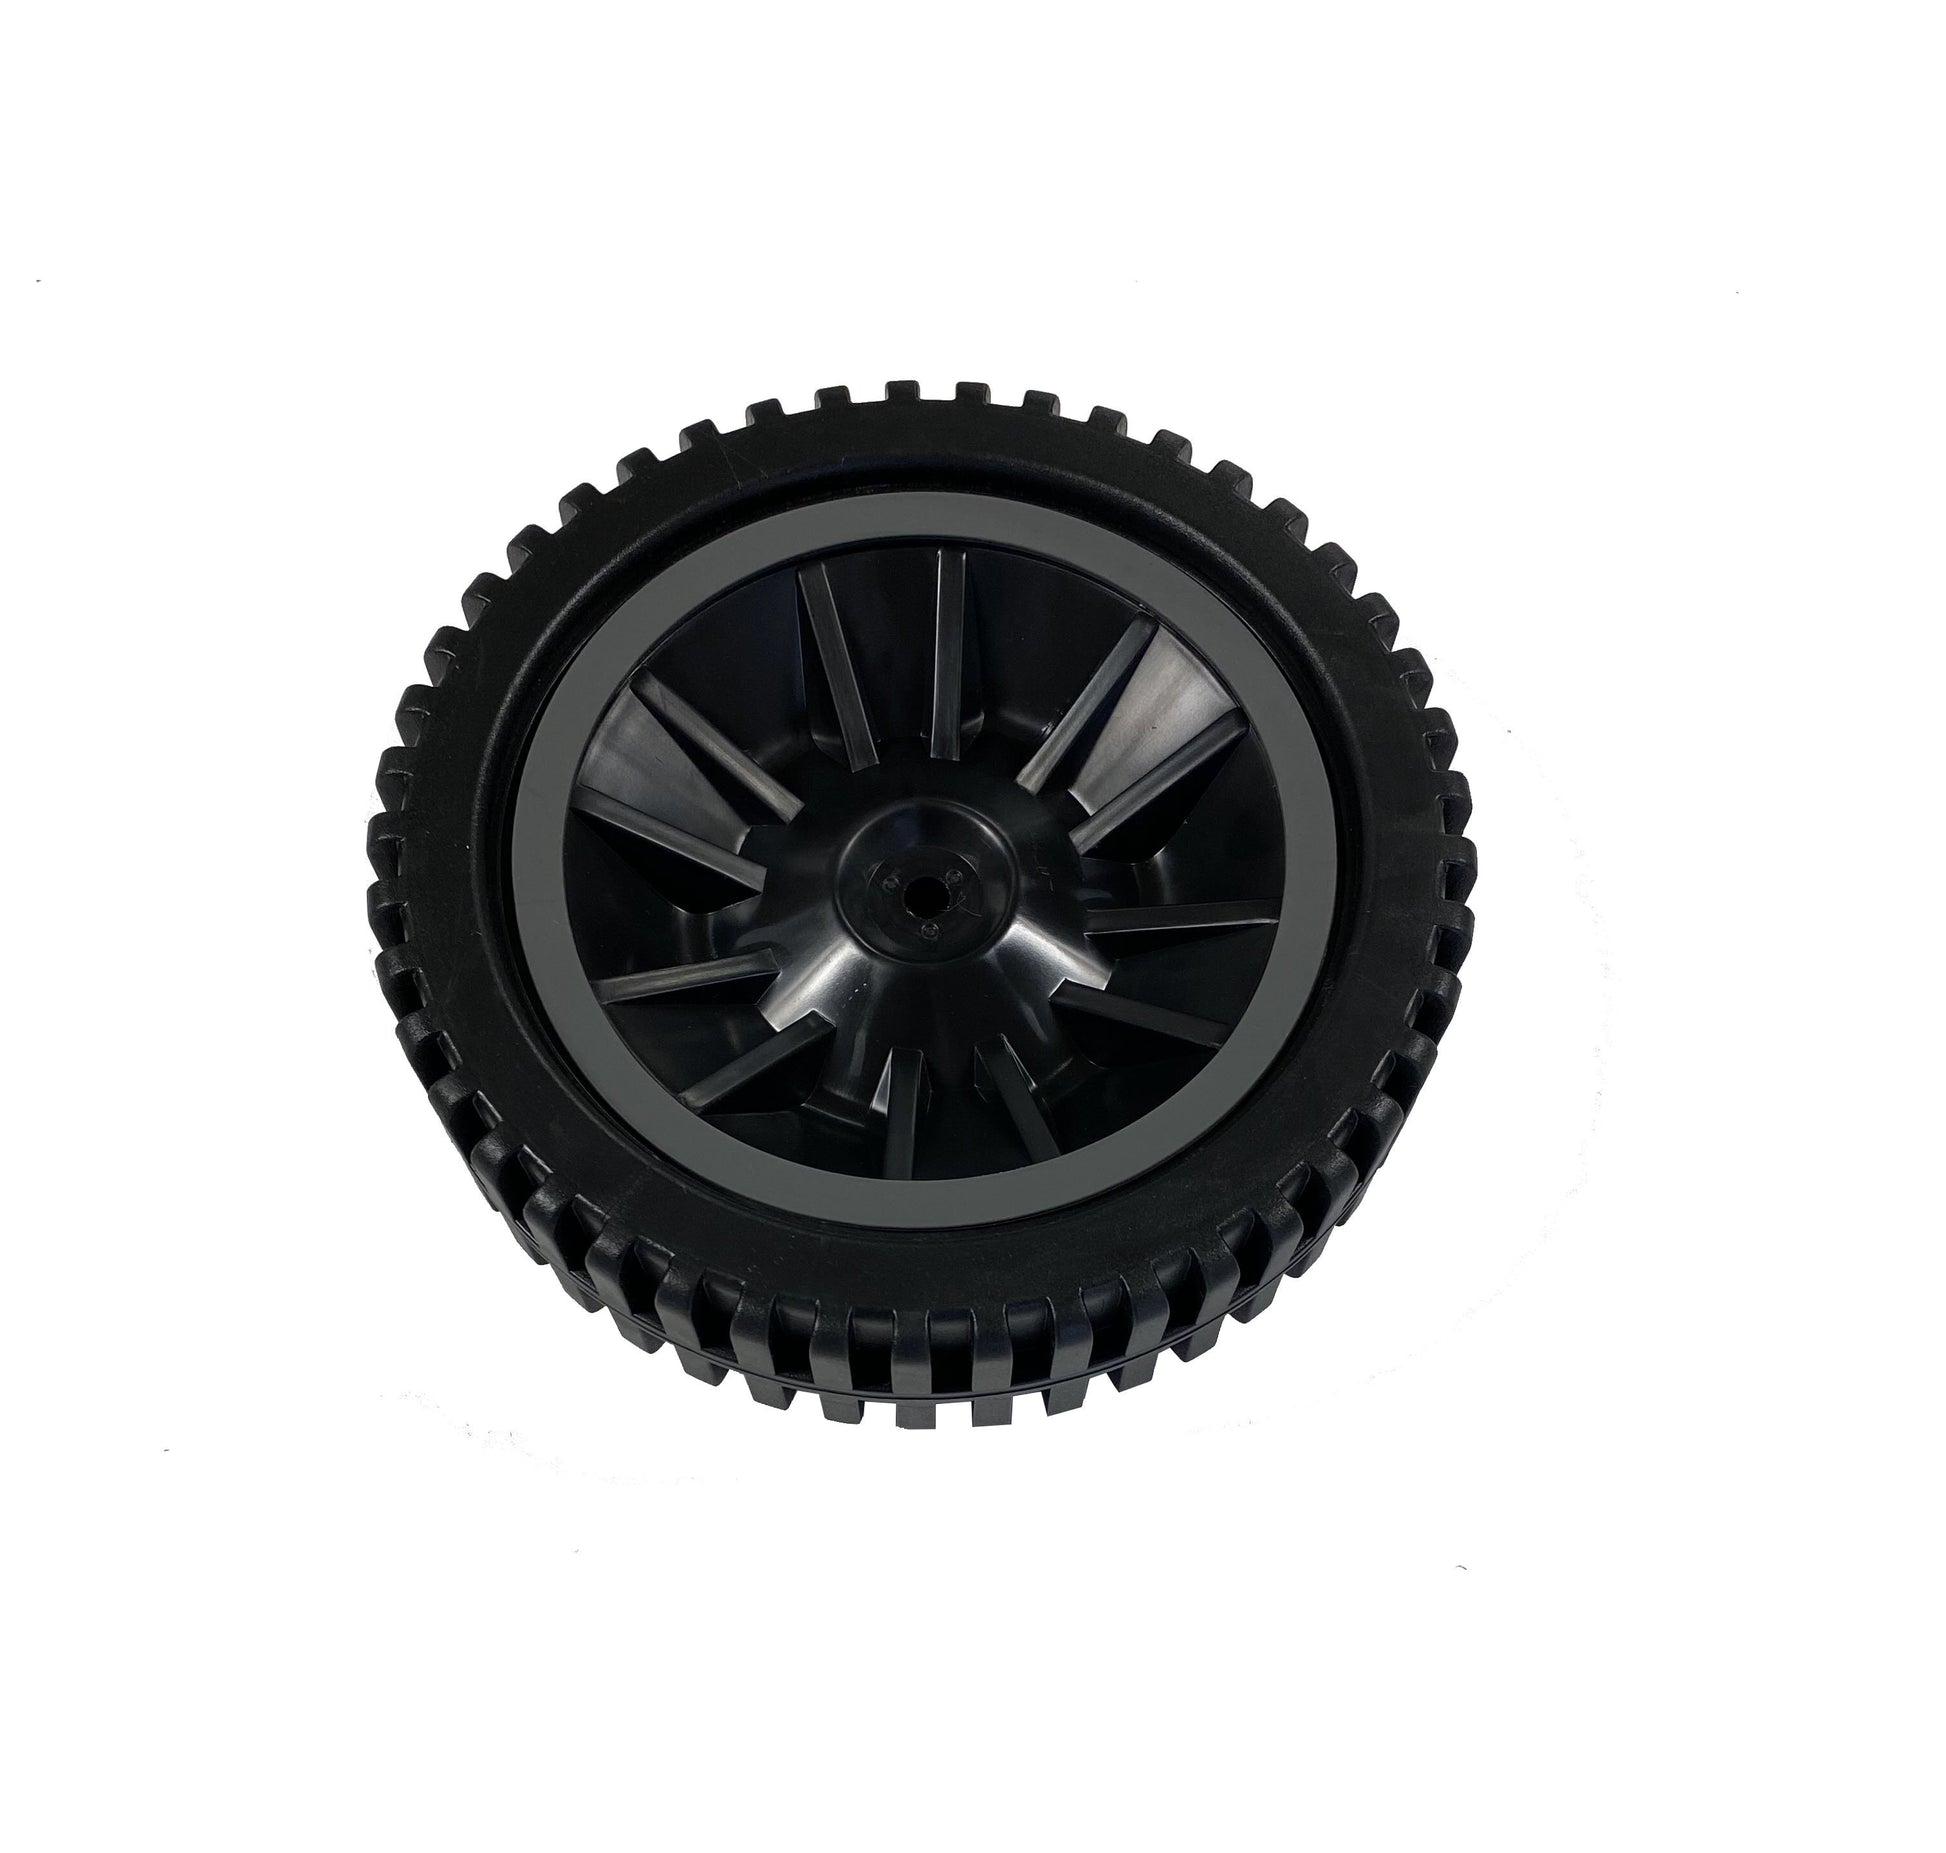 Broil King 108928 8” wheel. Be ready to roll into barbecue and patio season with some full functioning casters and wheels. Order your parts today!  Available with Barbecues Galore: Burlington, Oakville, Etobicoke & Calgary.